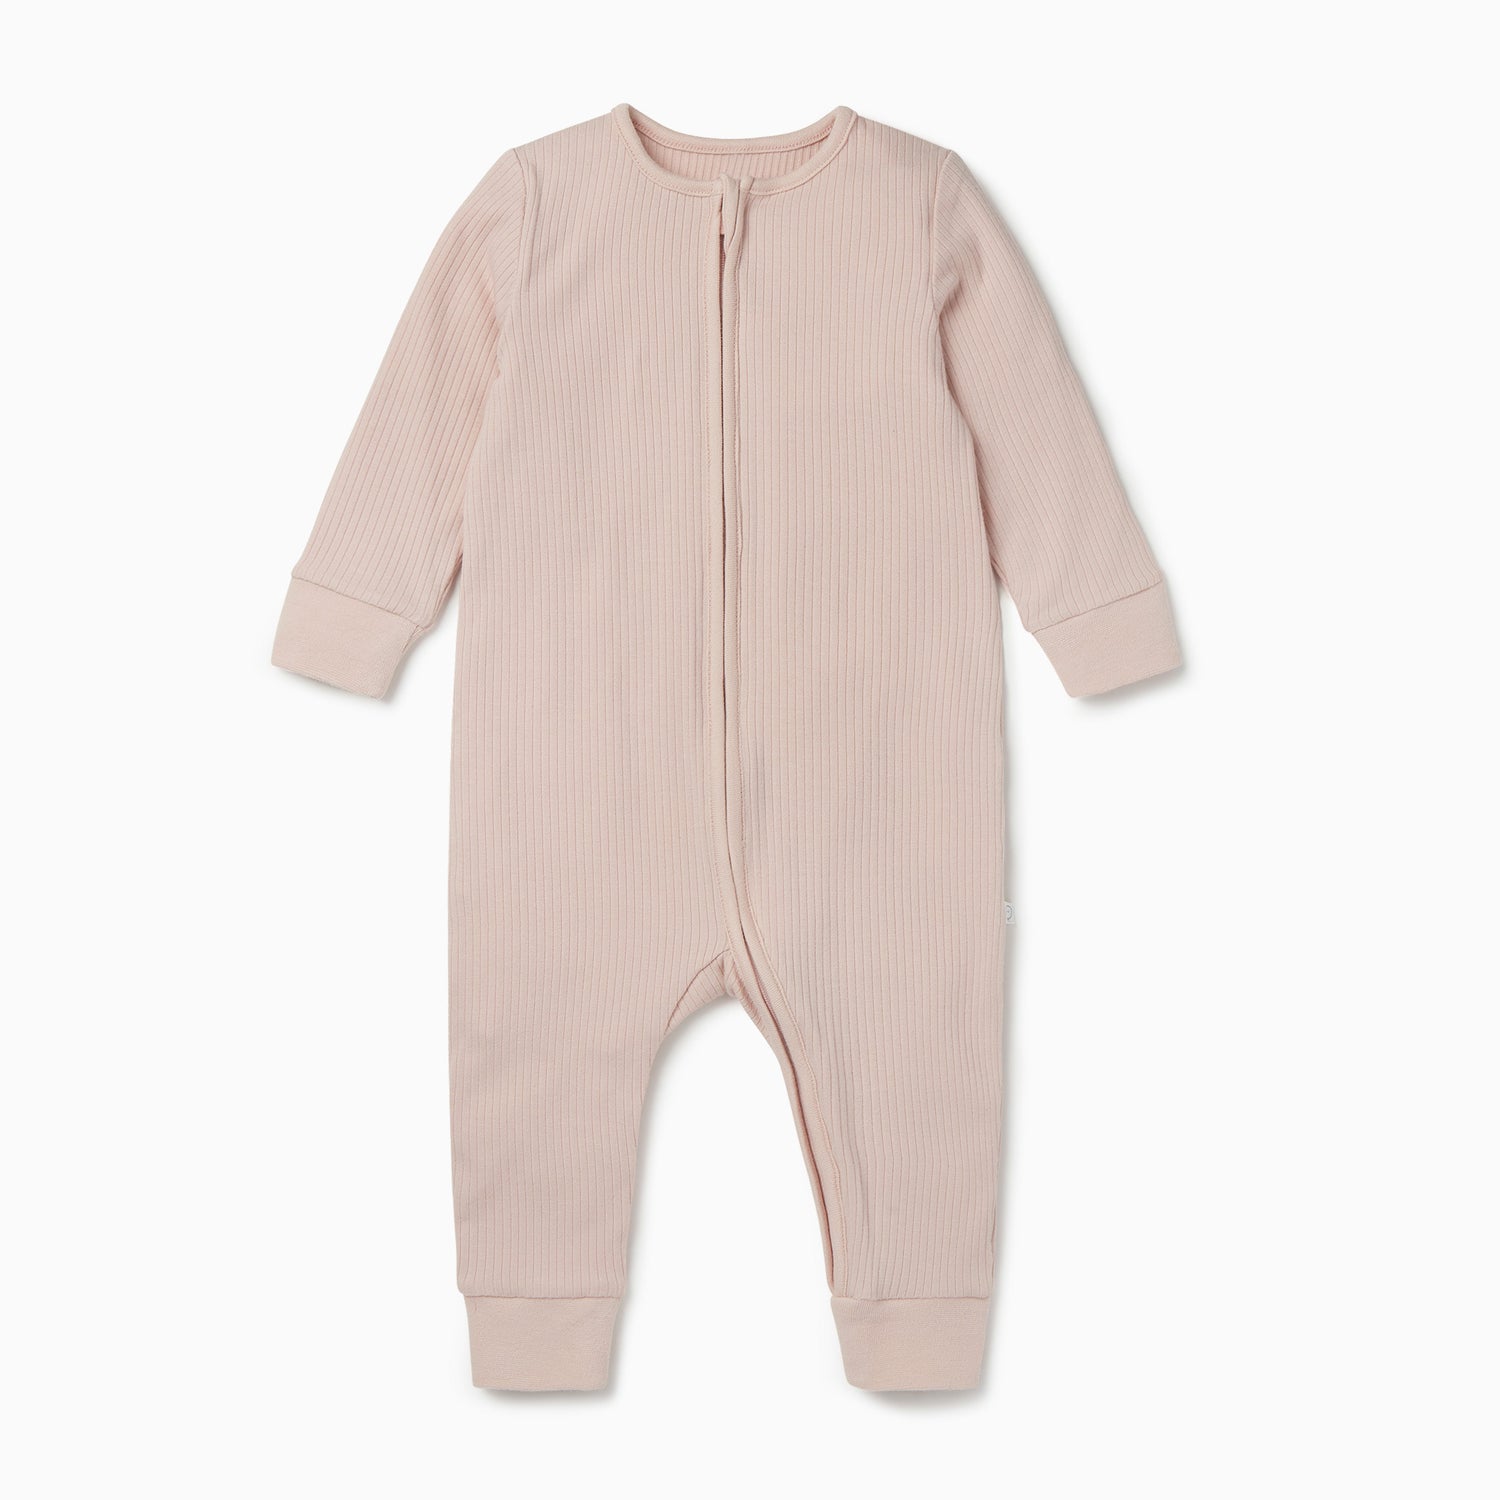 Blush ribbed zip up sleepsuit with no feet